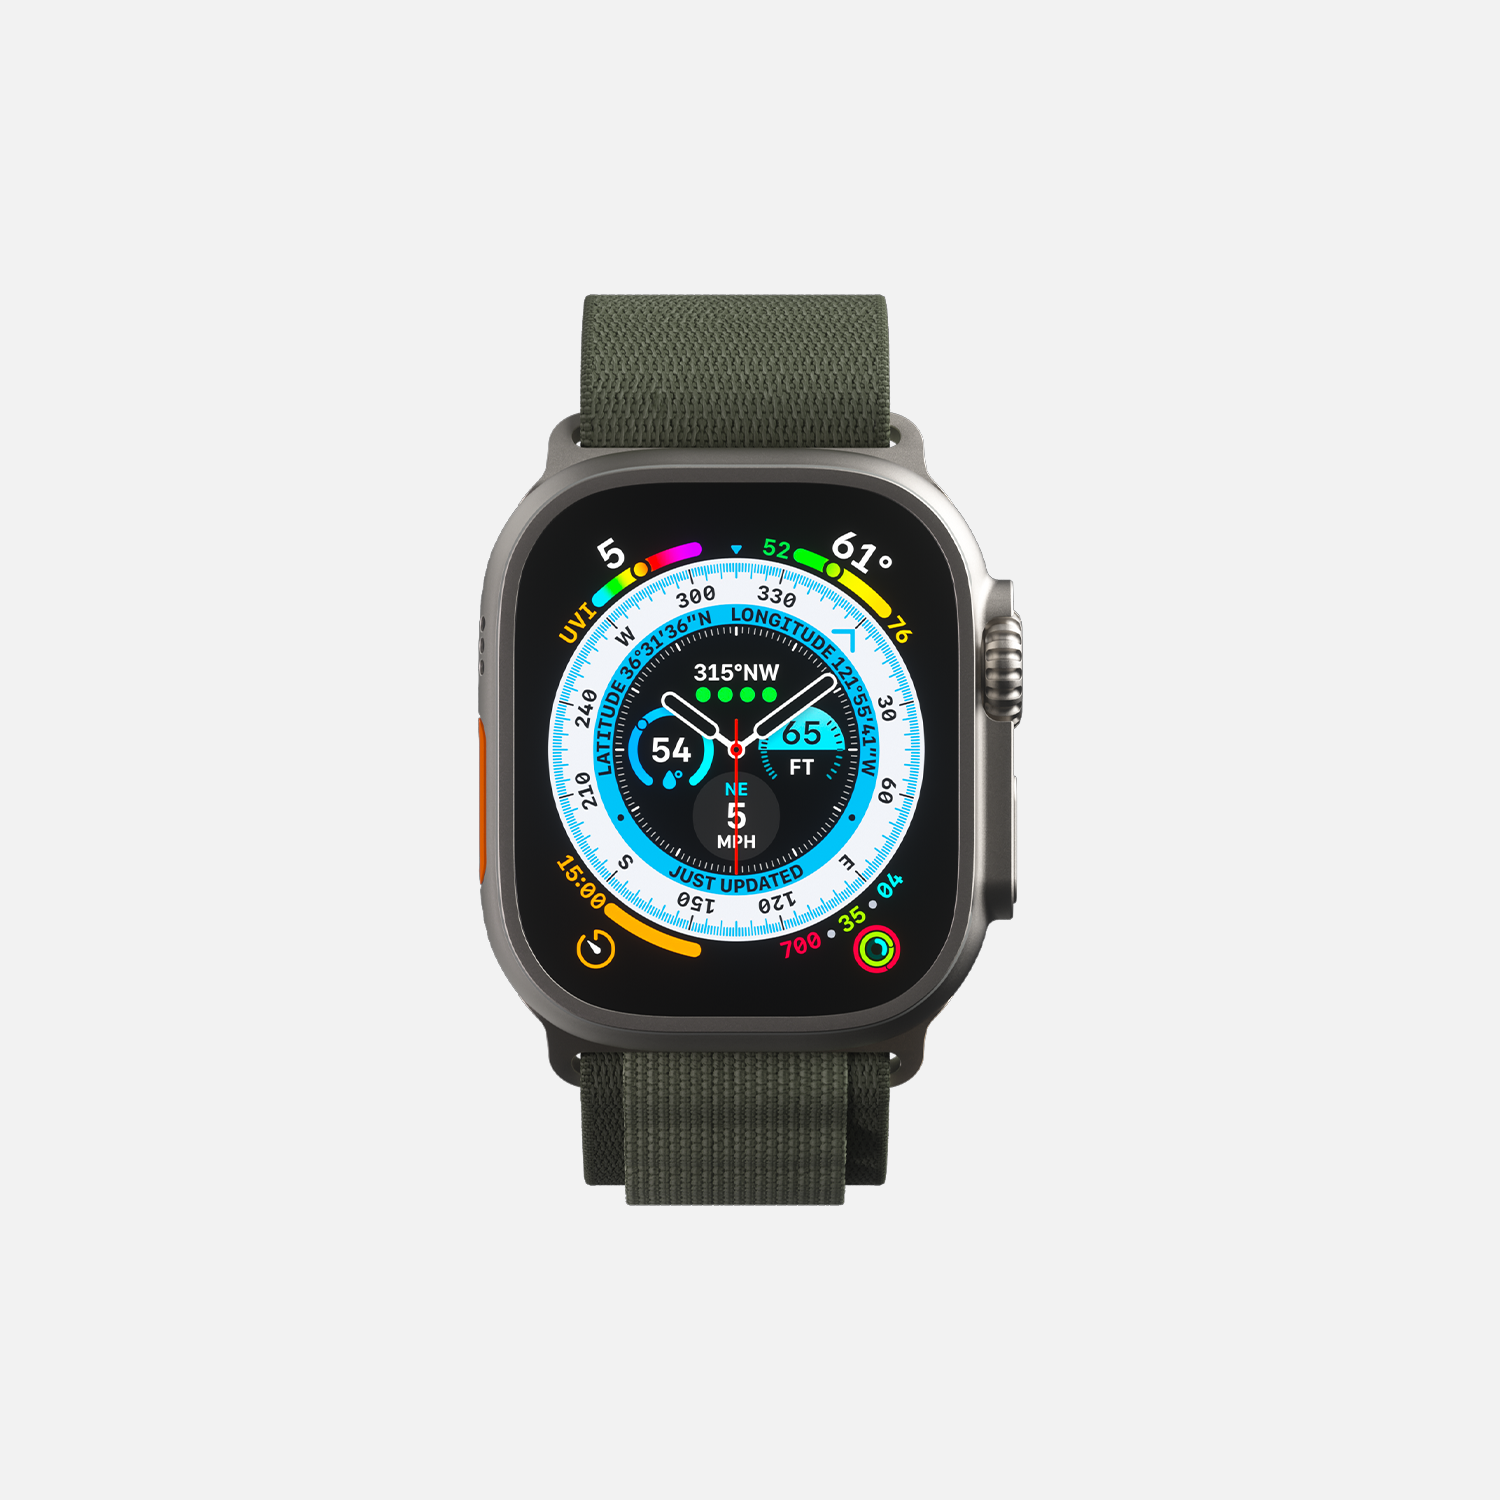 Smartwatch with colorful display and green strap on white background, showing compass and altitude features.